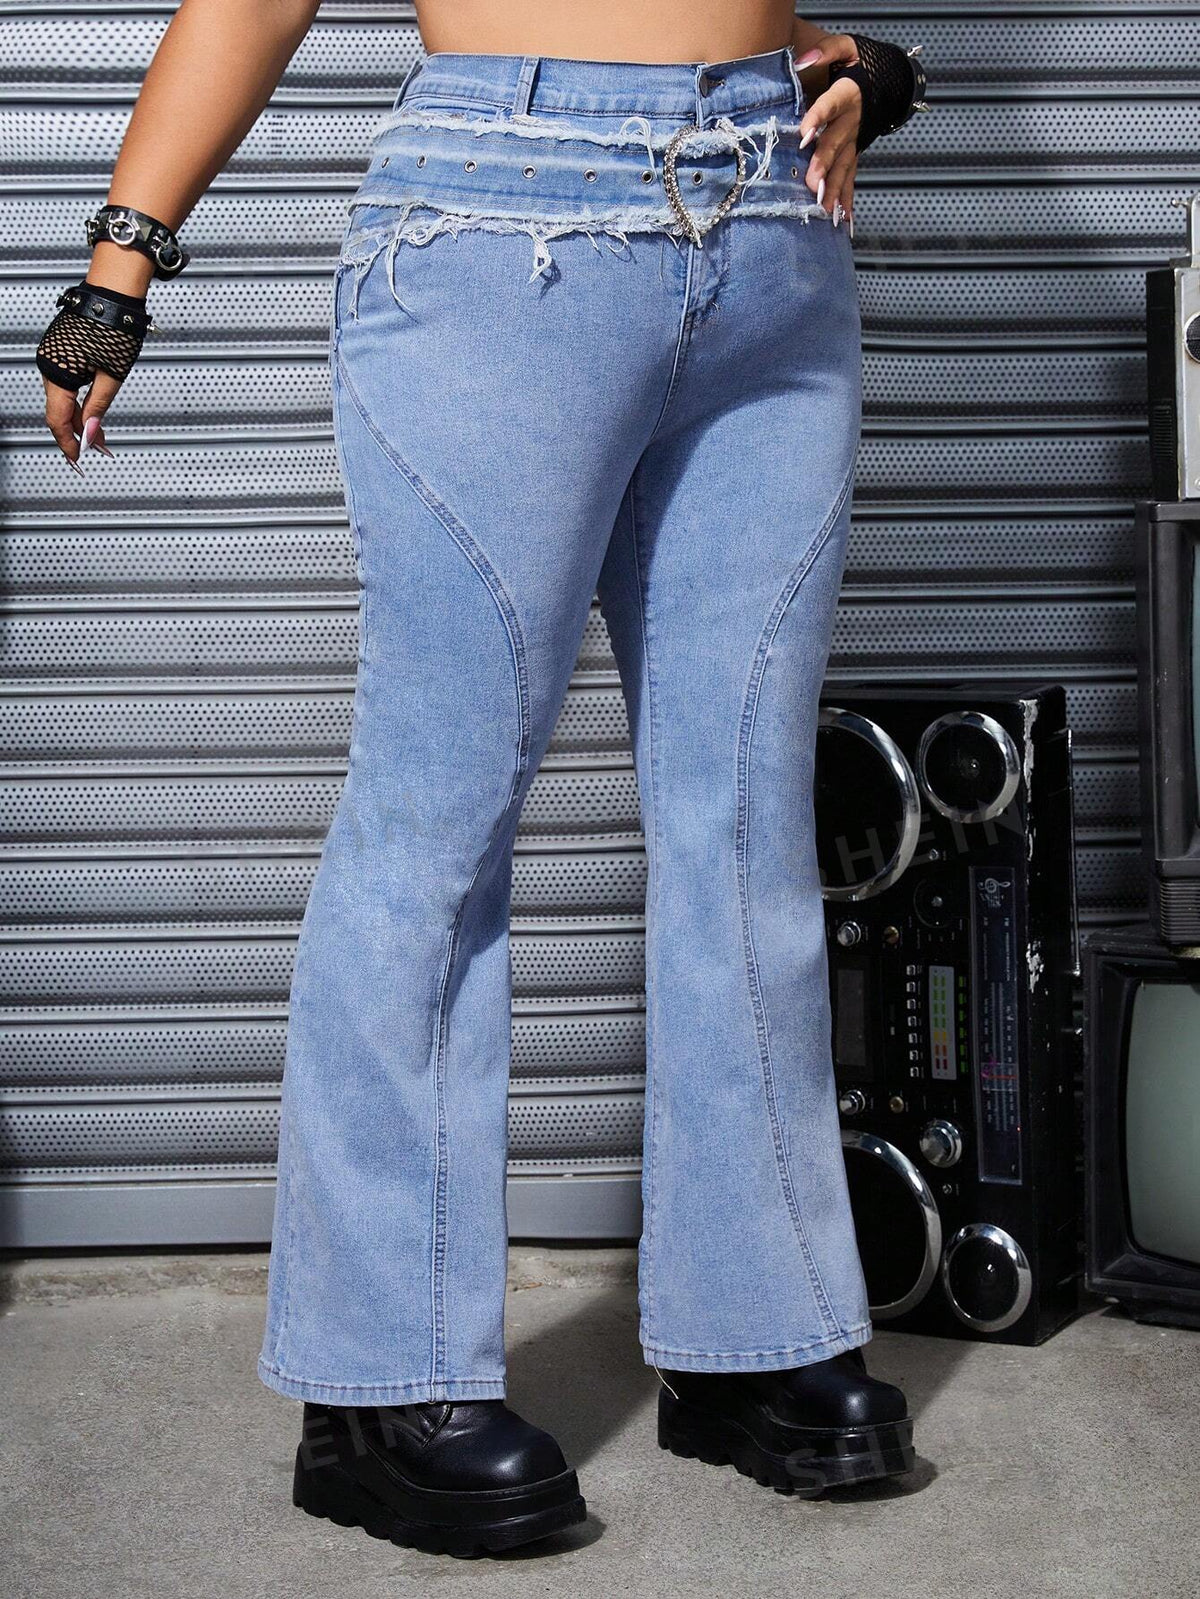 ROMWE Grunge Punk Women's Plus Size Flared Casual Jeans With Waist Corn And Buckle Design